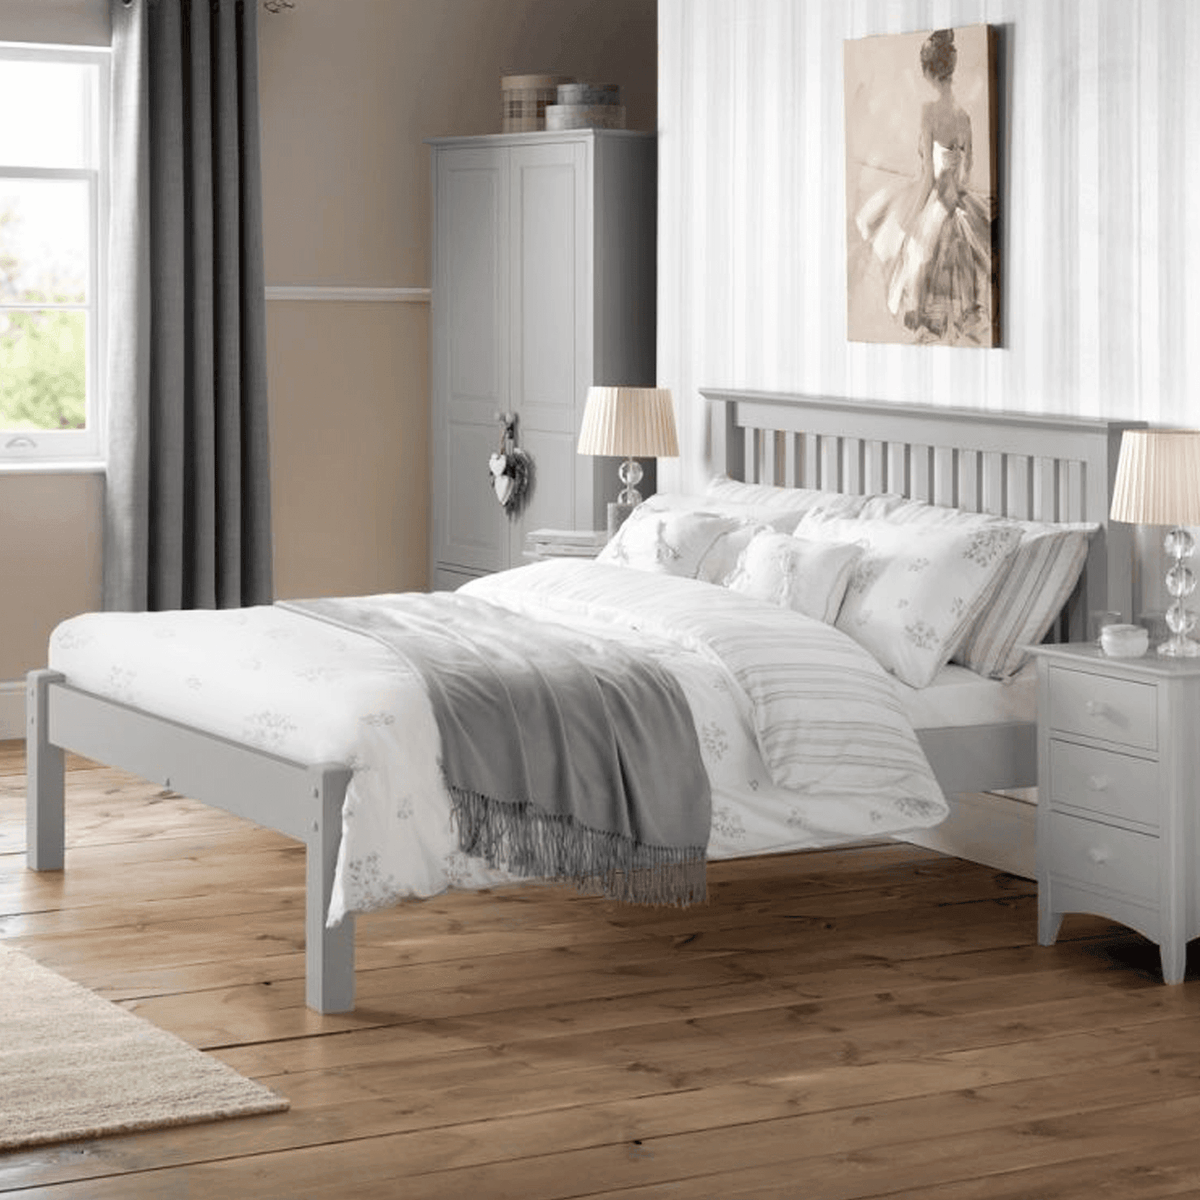 Double Size Bed Frame